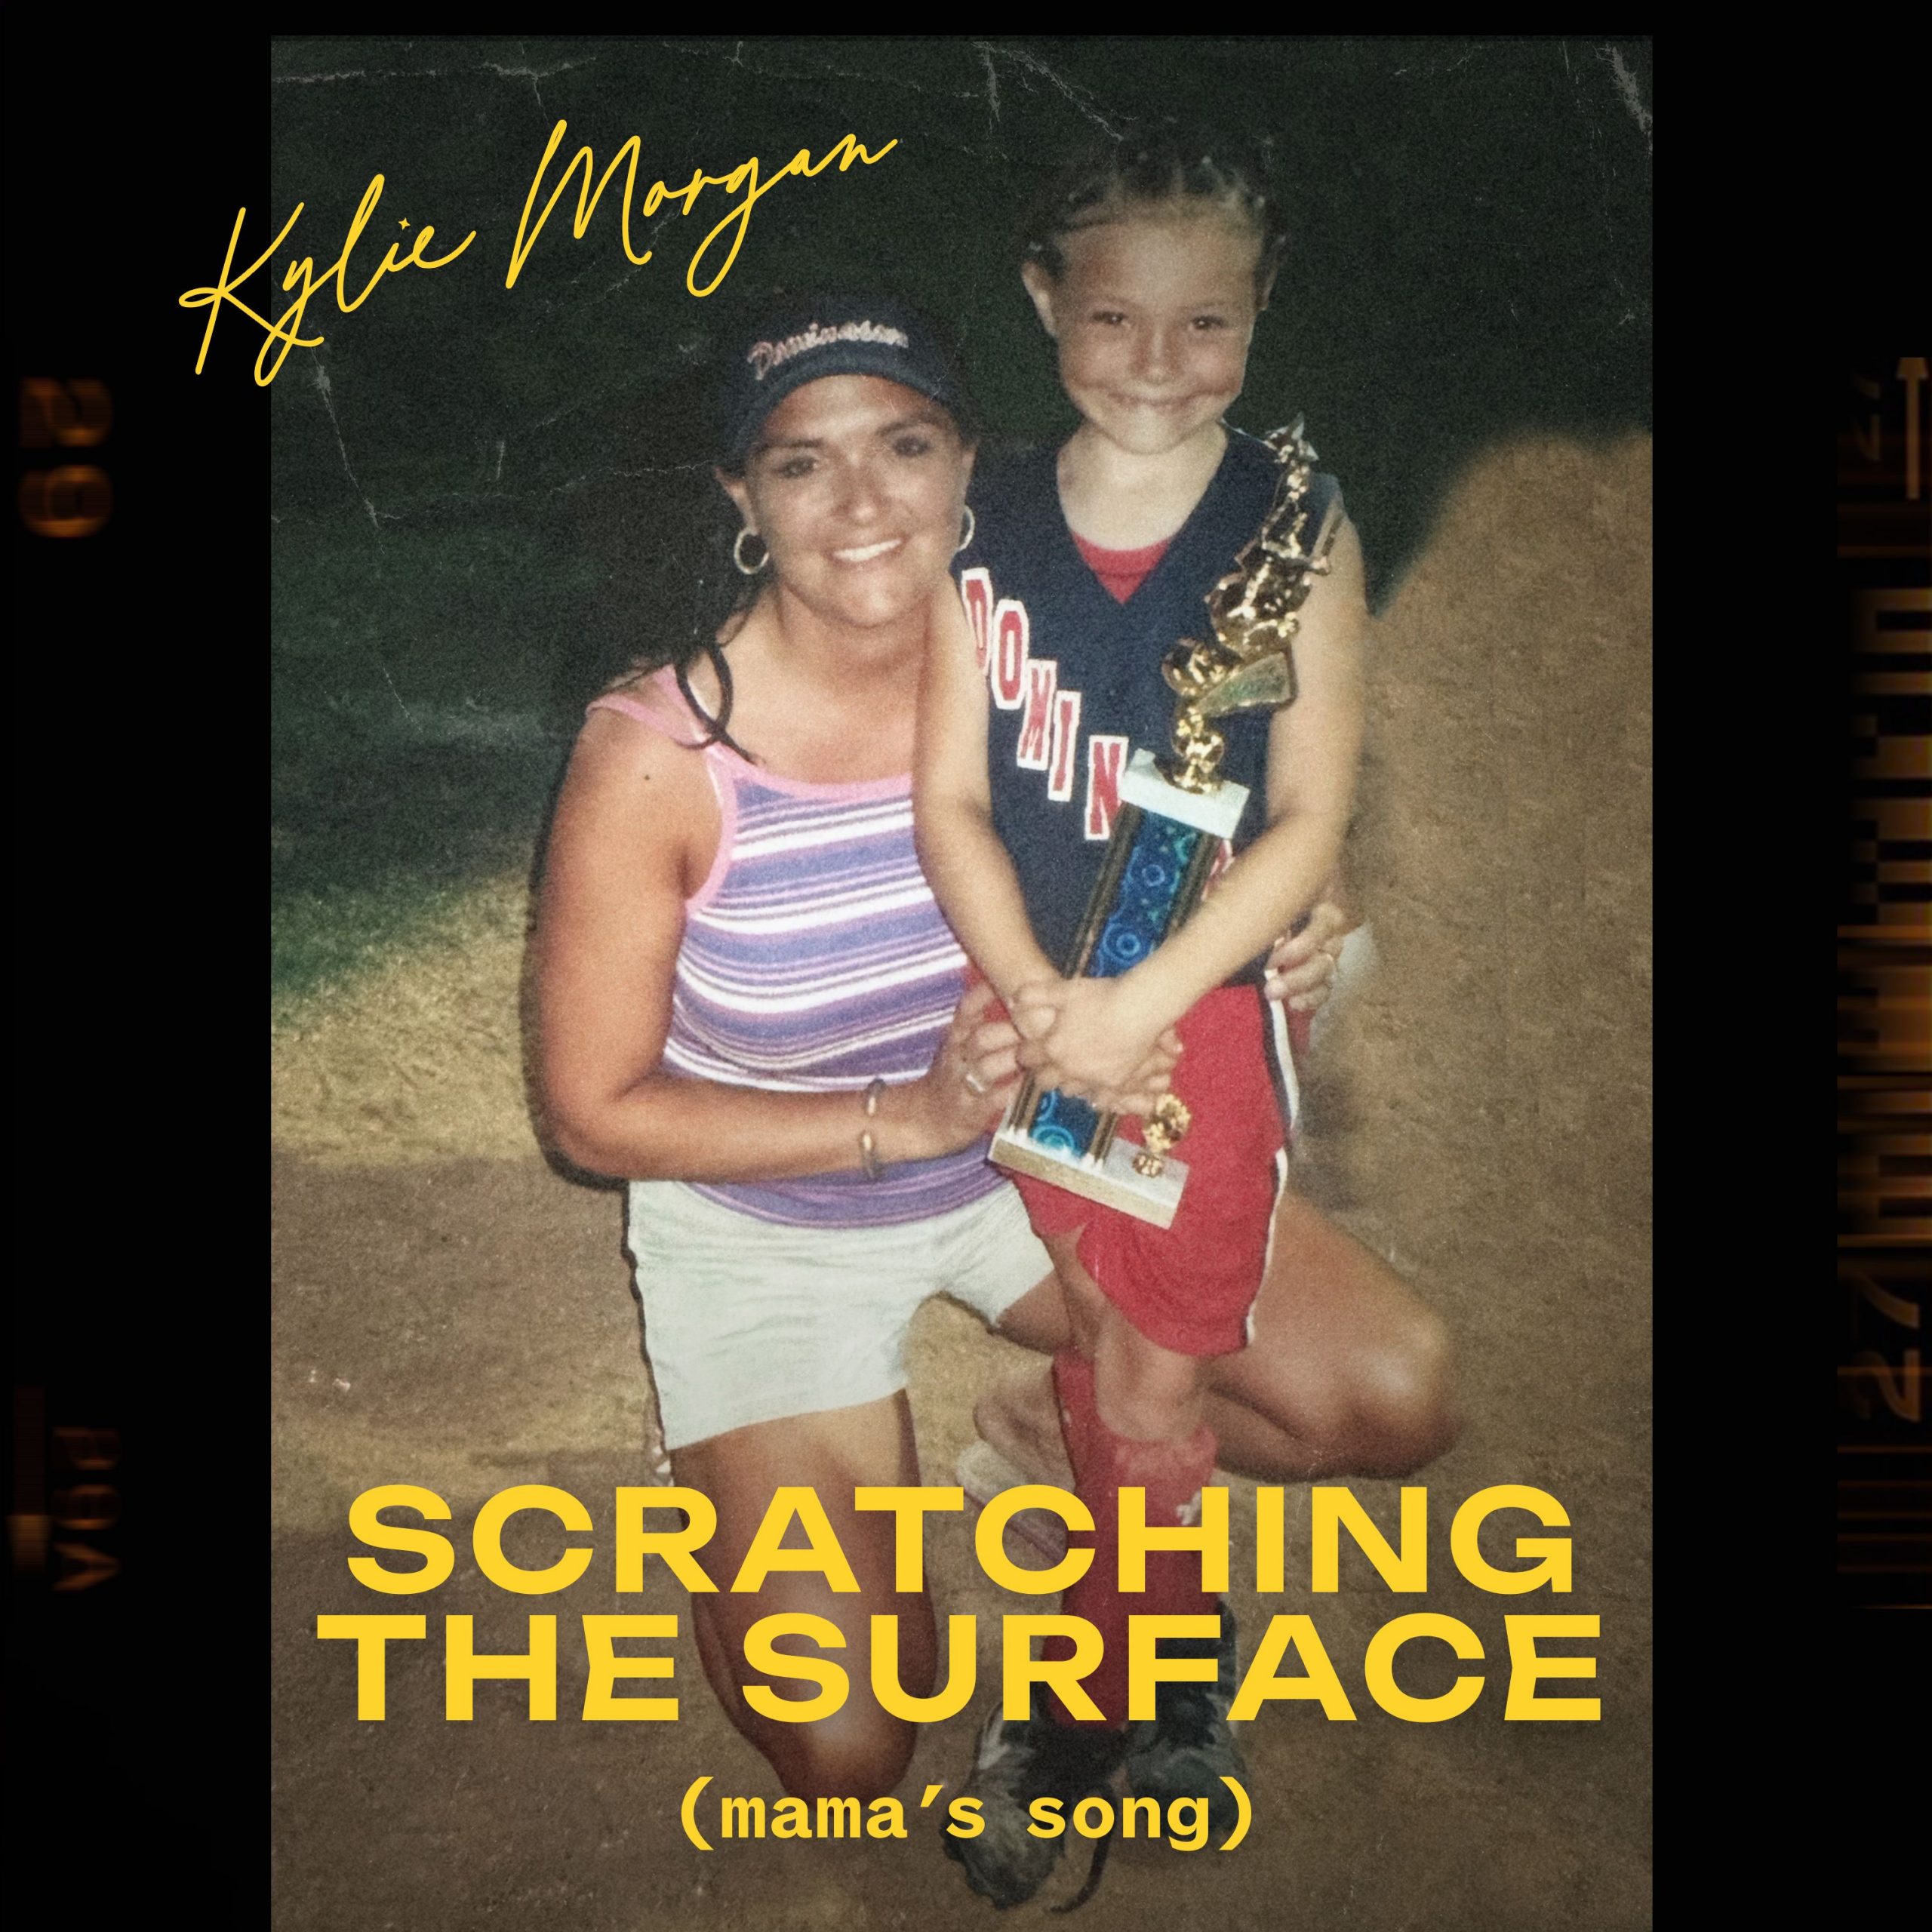 KYLIE MORGAN RELEASES “SCRATCHING THE SURFACE (MAMA’S SONG)”